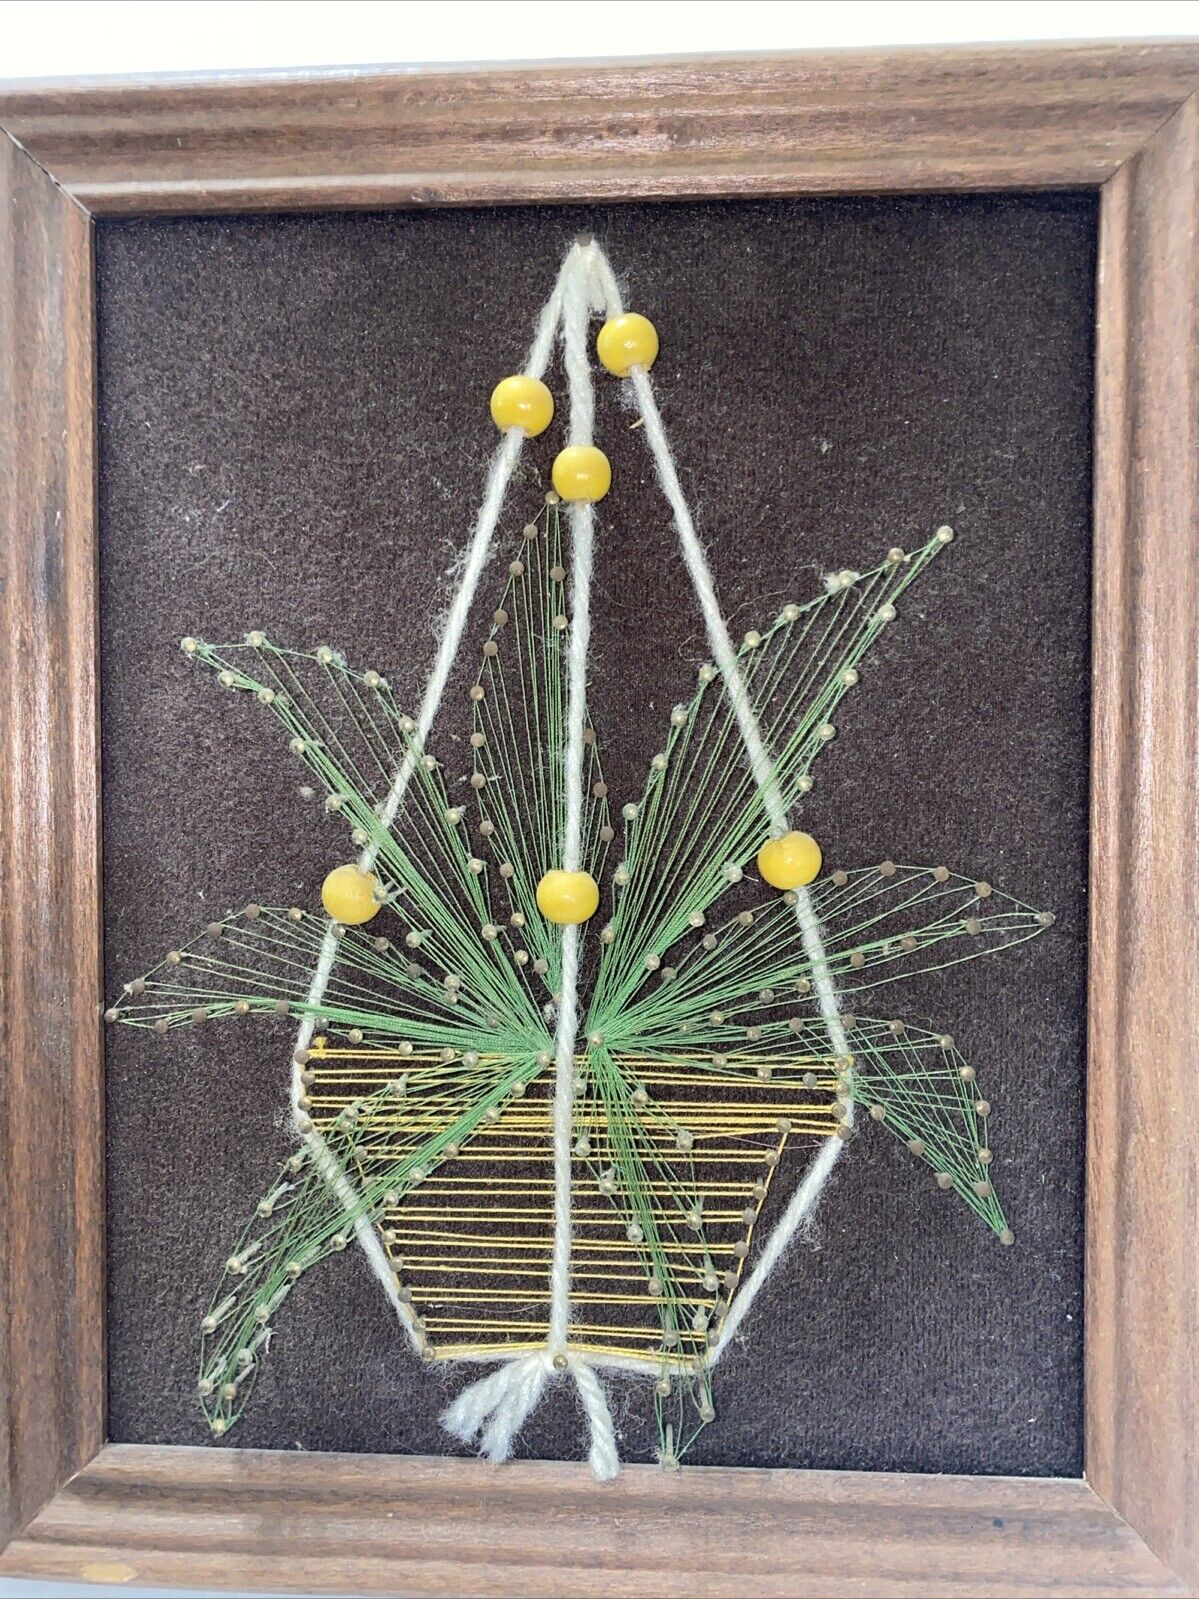 Vintage Retro 1970’s Picture Of Hanging Basket Shaped String Art Wood Wall Decor